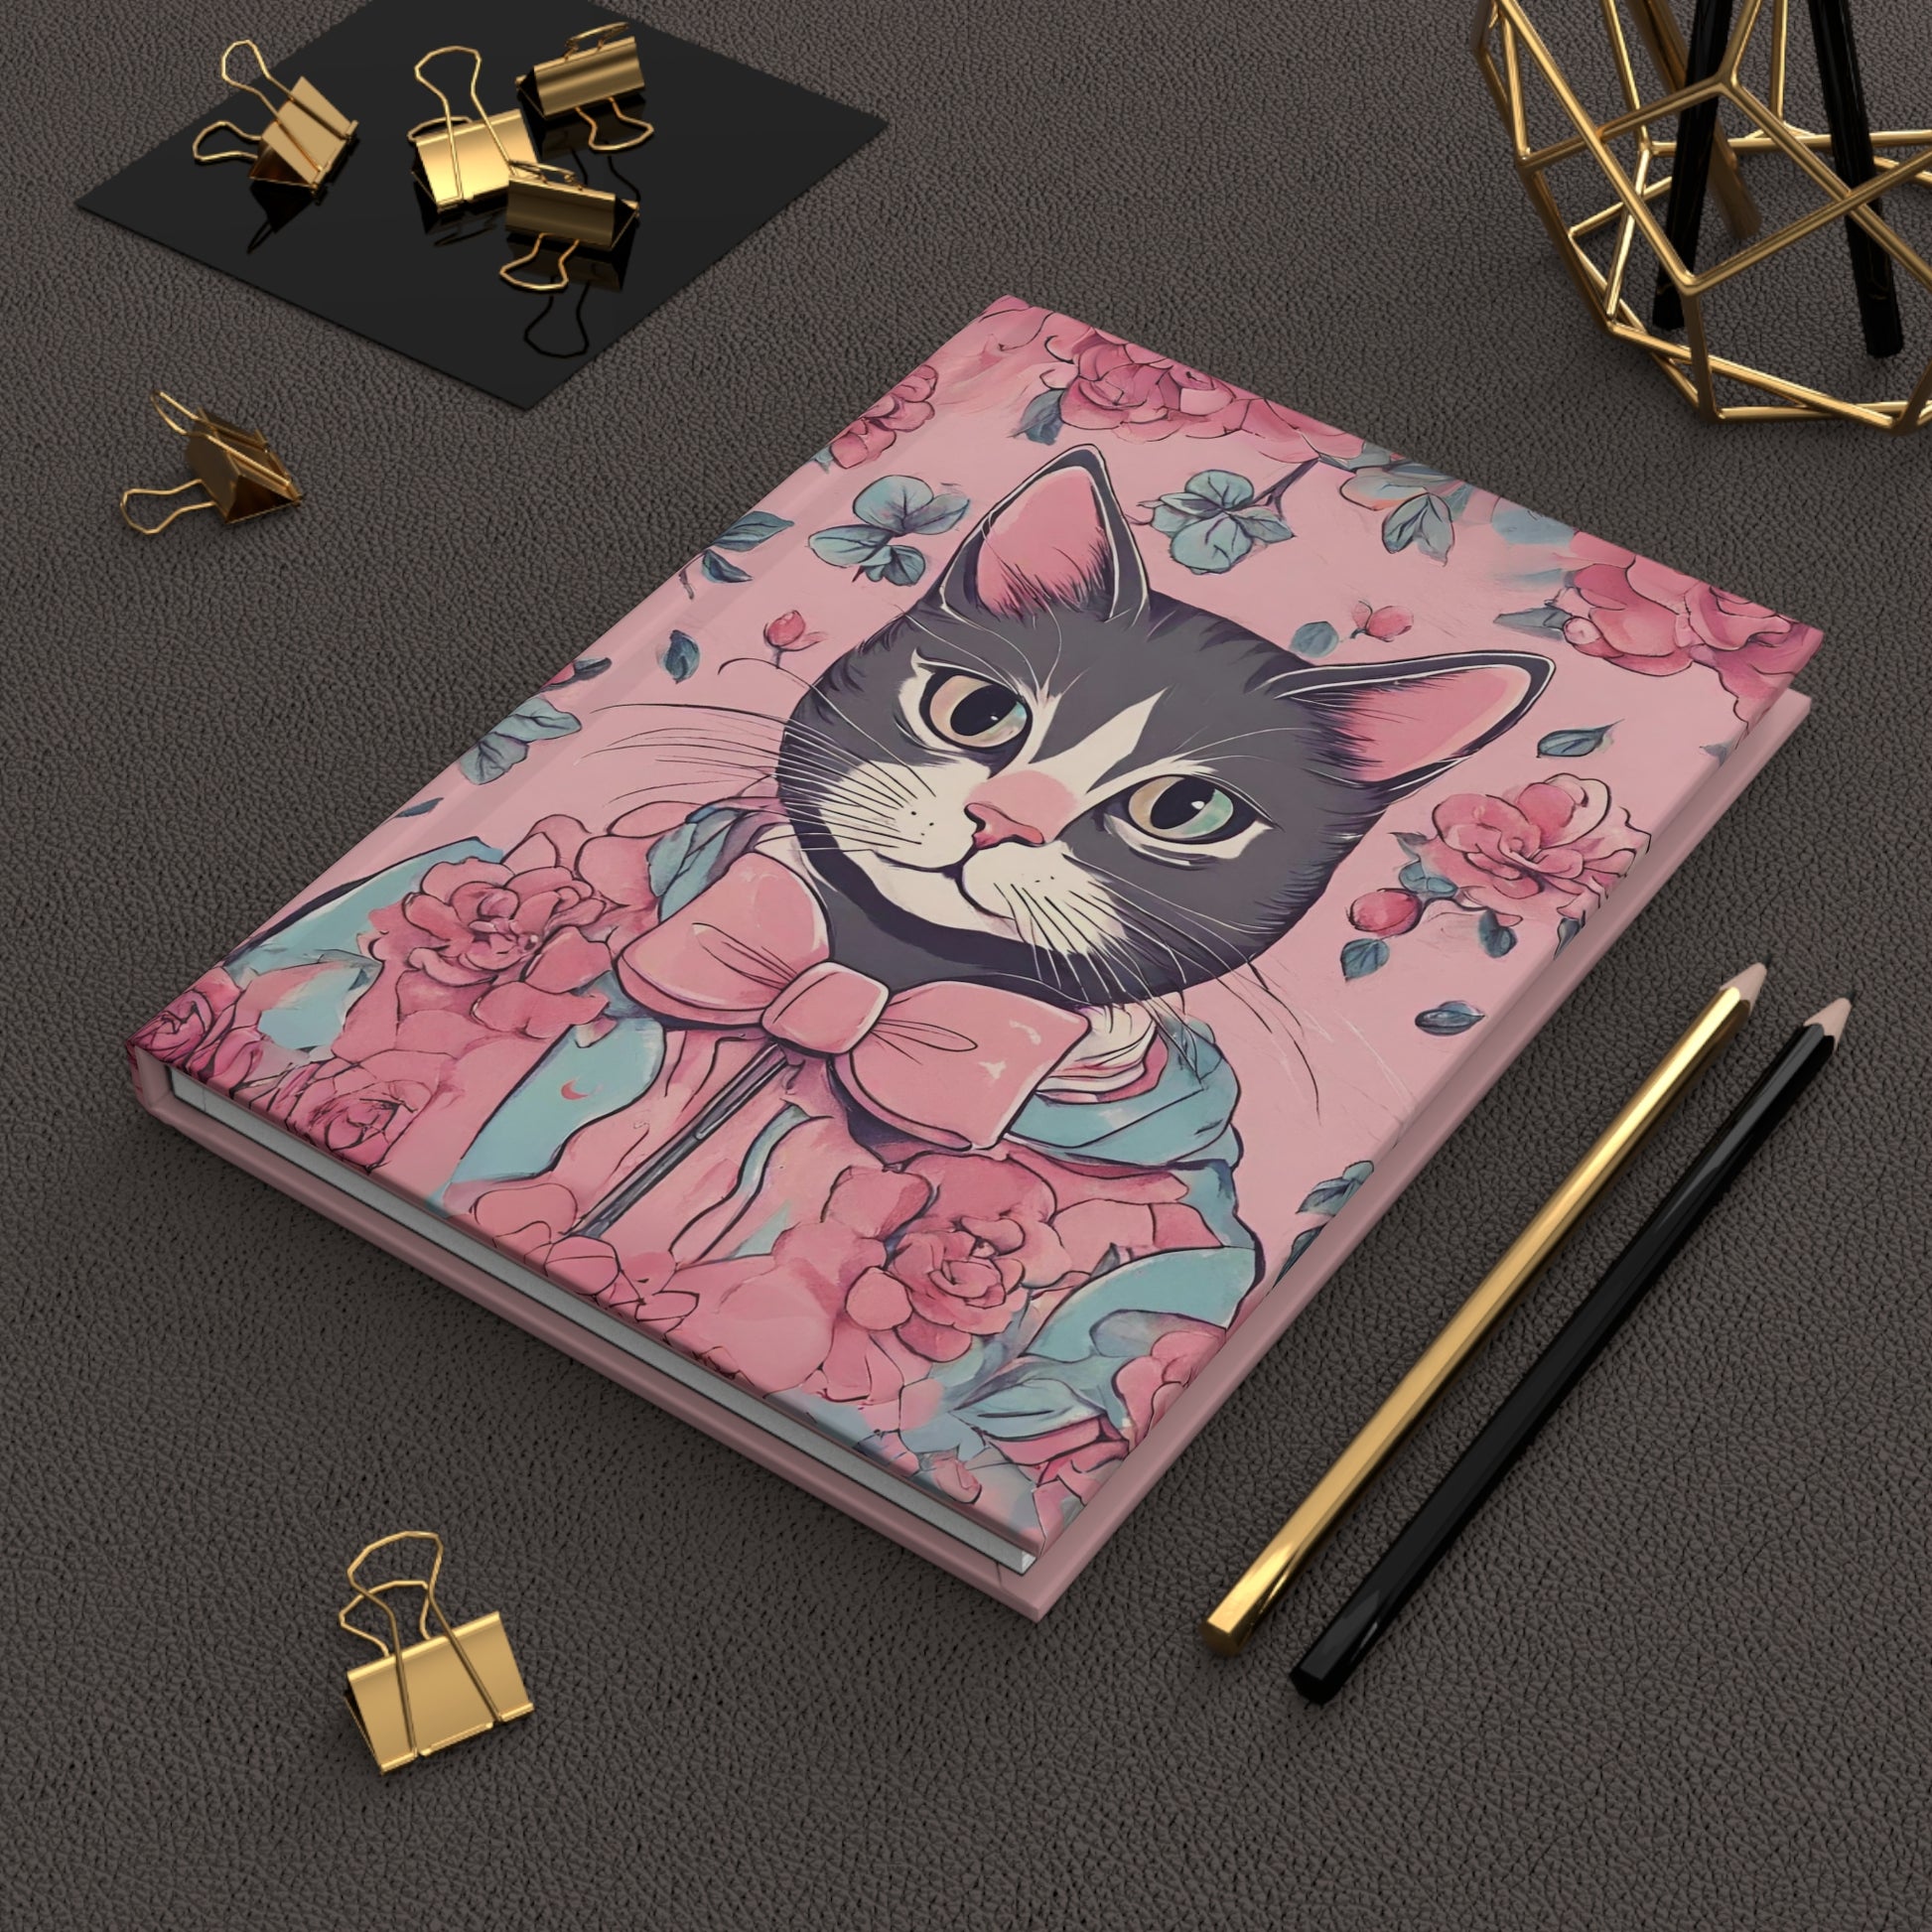 Cottagecore aesthetic cat Journal, Cute floral cat notebook, vintage victorian Cat notebook, Kawaii flowers cat journal, back to school gift